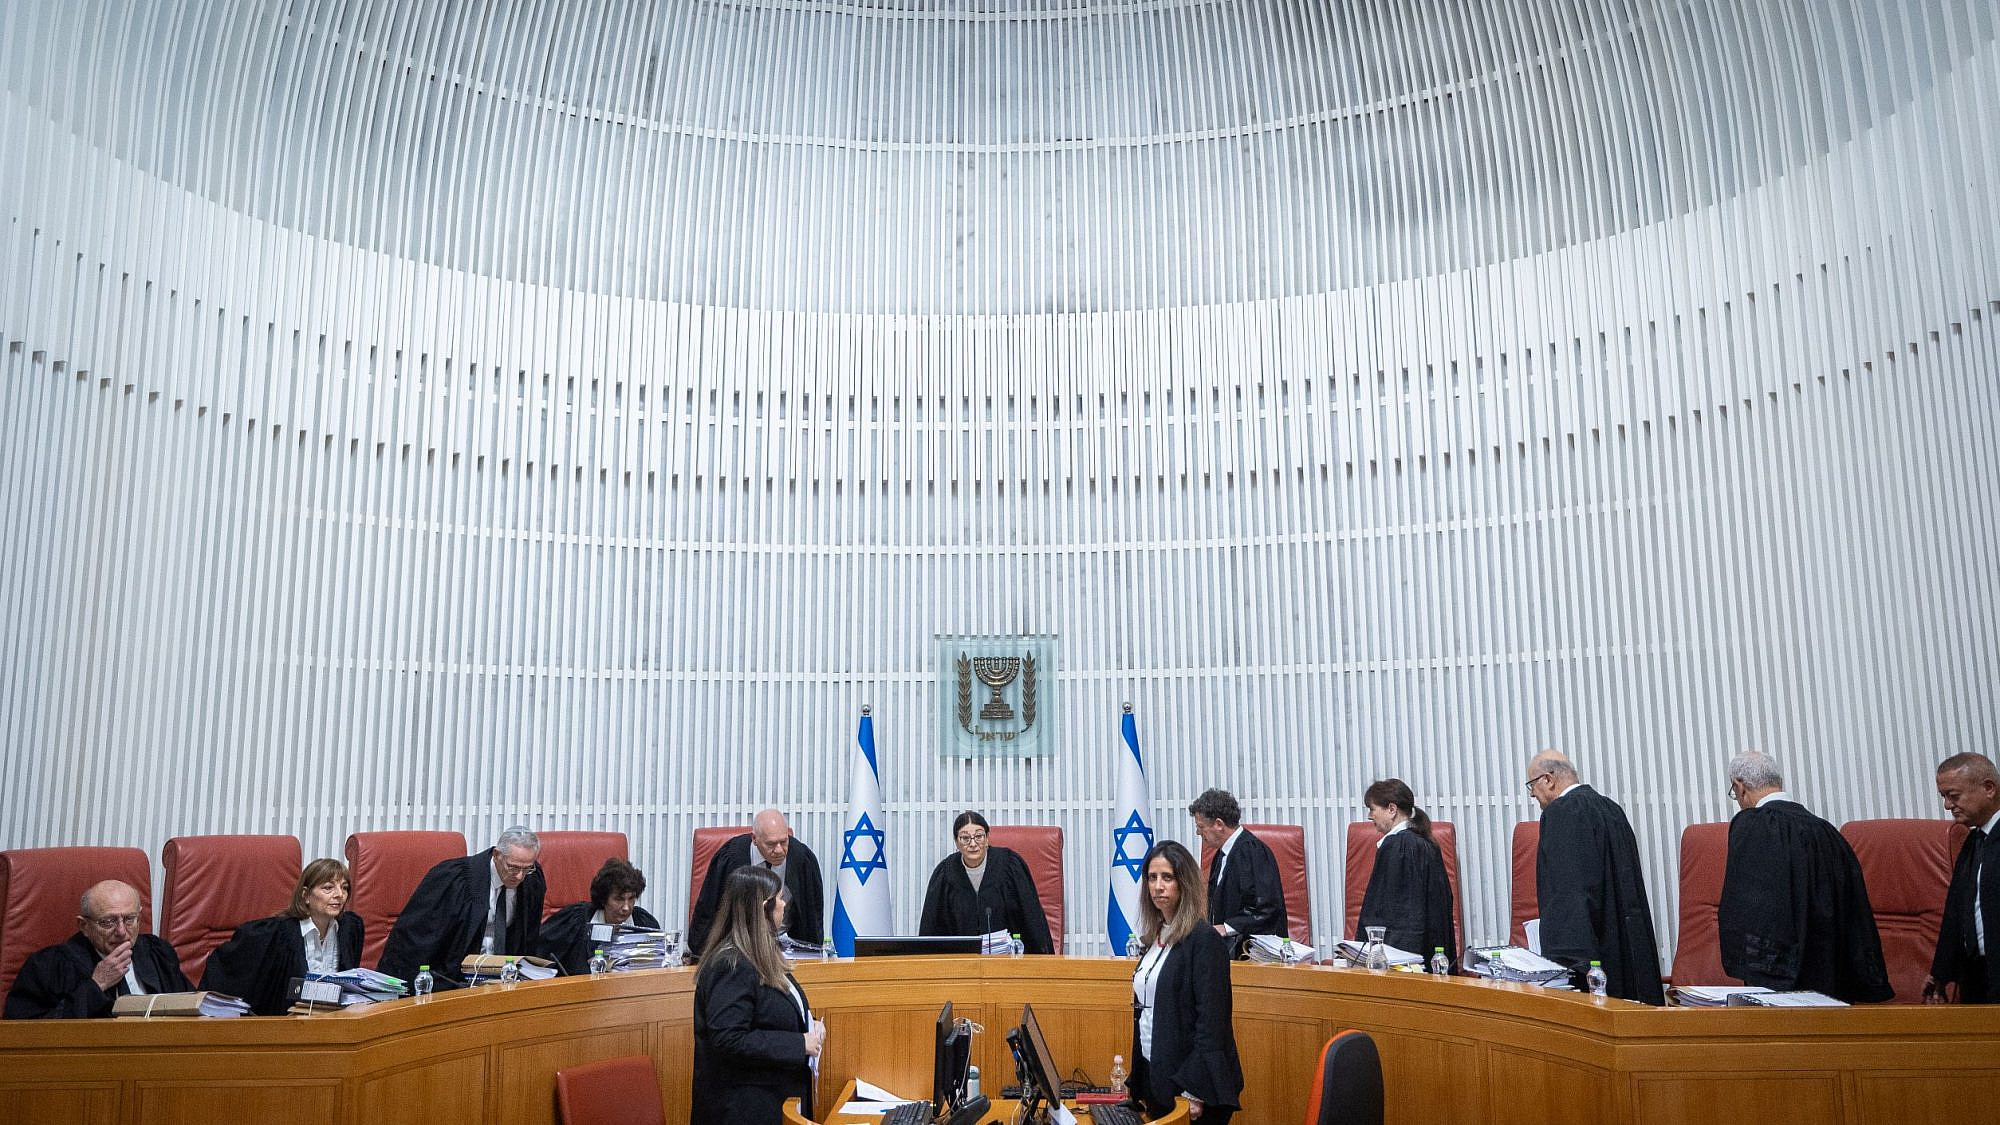 Supreme Court justices arrive for a hearing in Jerusalem on the appointment of Shas leader Aryeh Deri as a government minister, Jan. 5, 2023. Photo by Yonatan Sindel/Flash90.